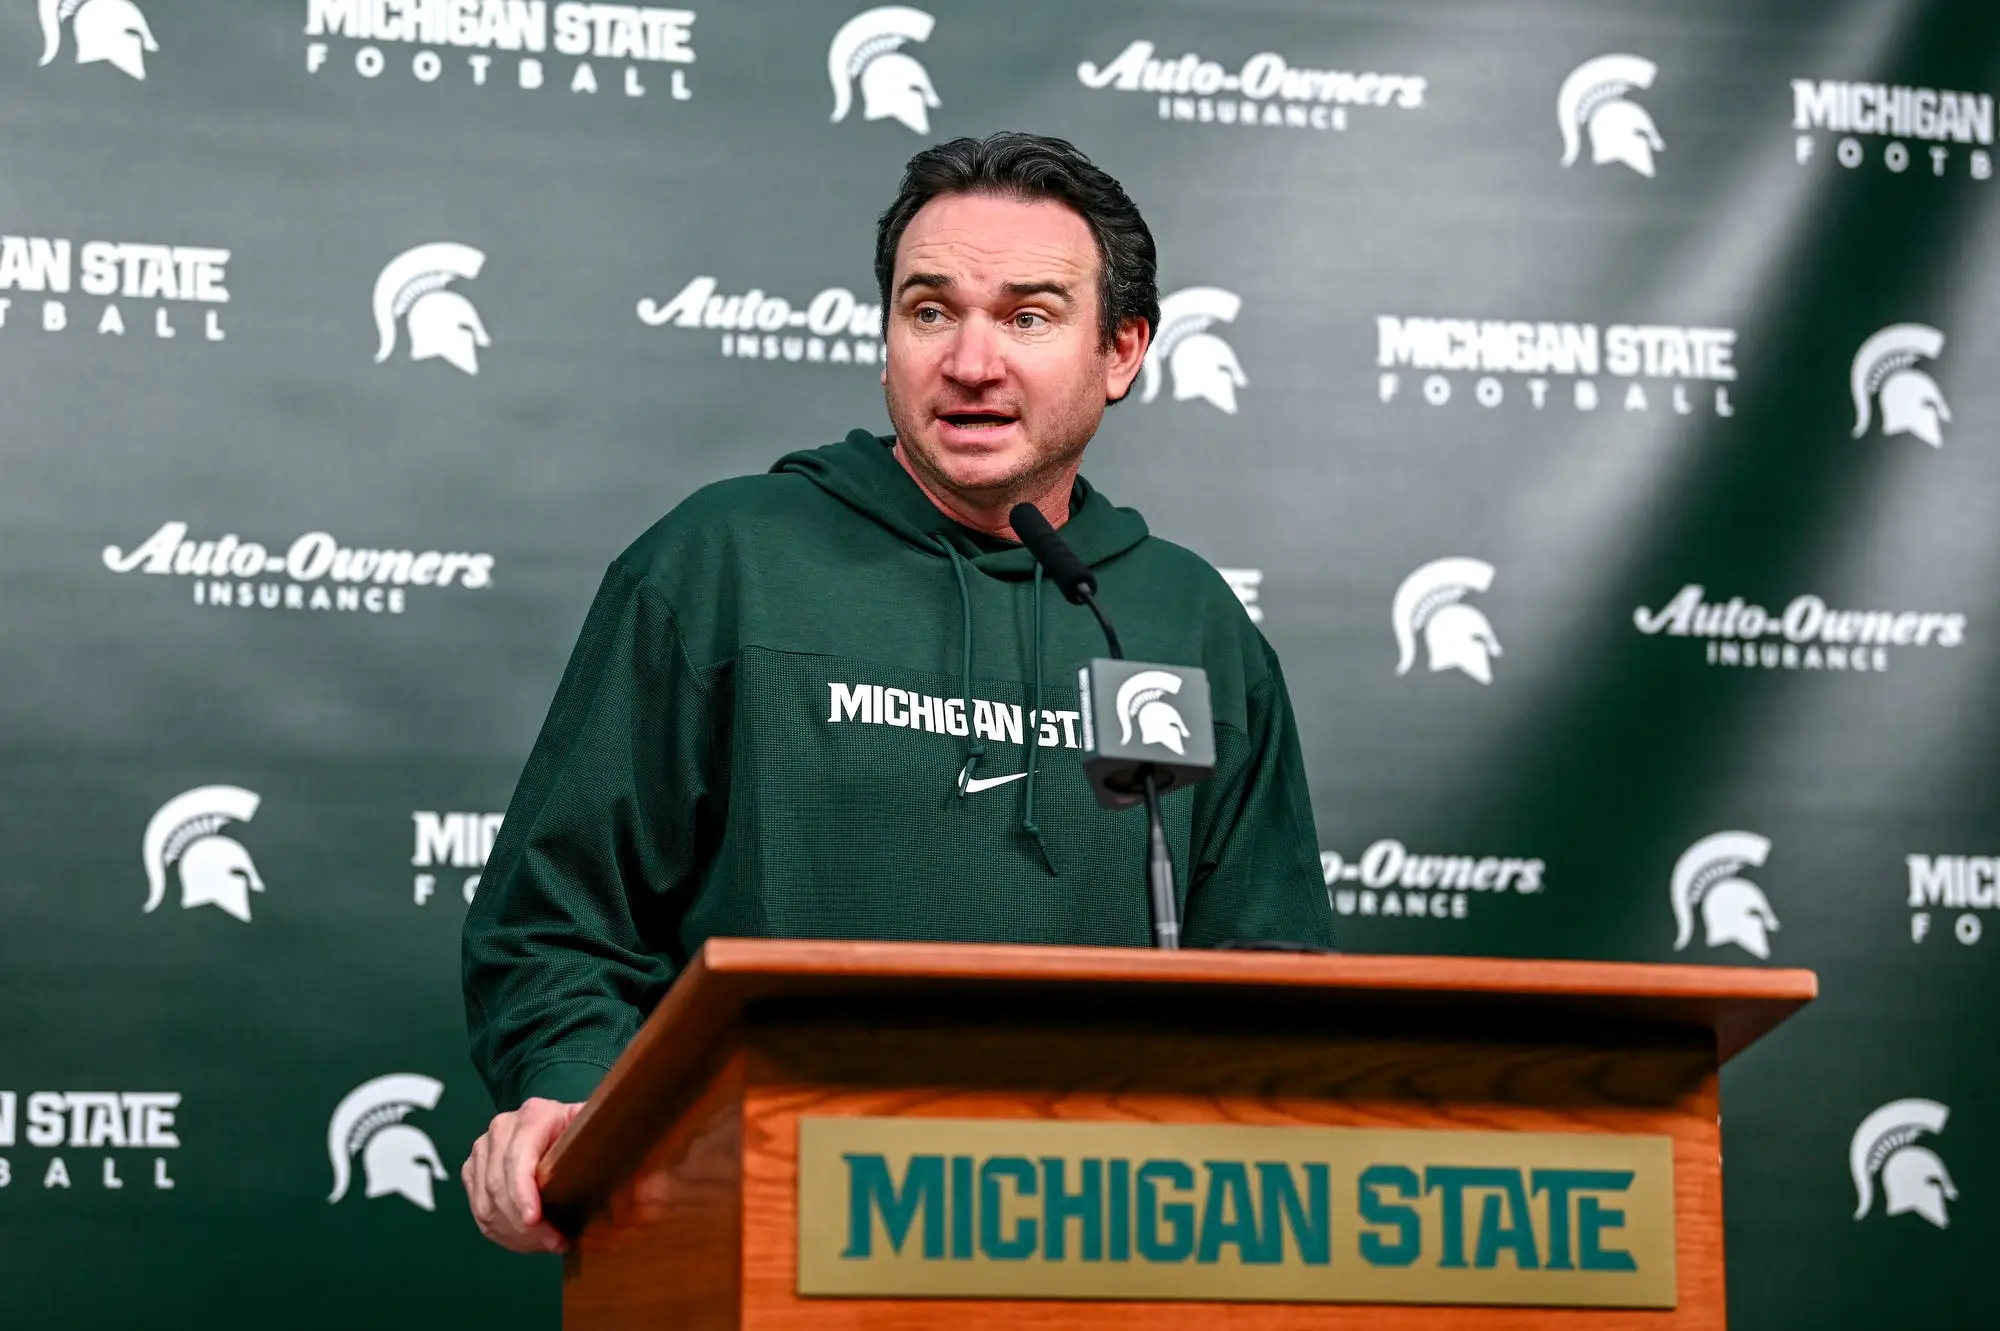 Michigan State coach Jonathan Smith talks the media on the first national signing day for college football recruits.